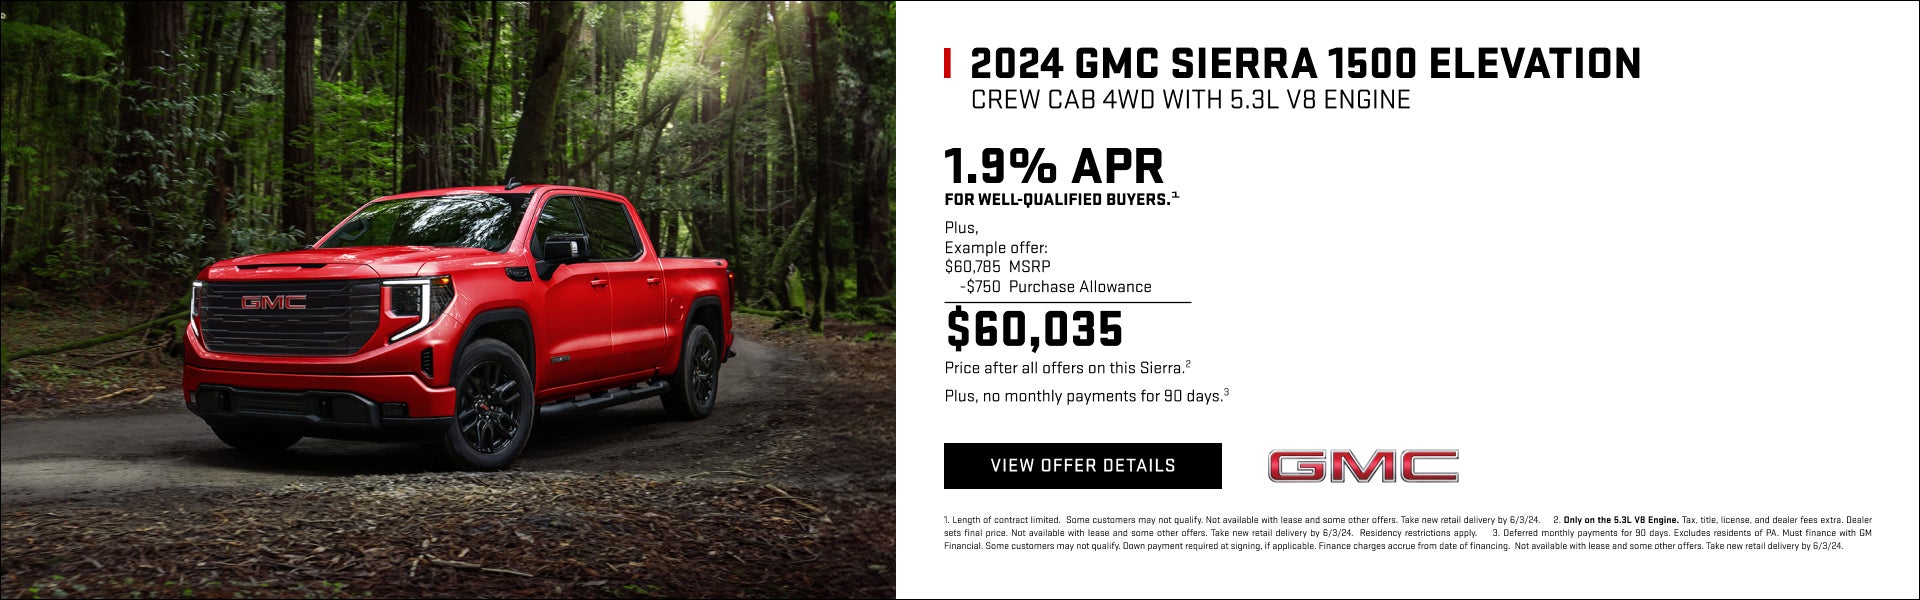 1.9% APR for well-qualified buyers.1

Plus,

Example offer:
$60,785 MSRP
$750 Purchase Allowance
...